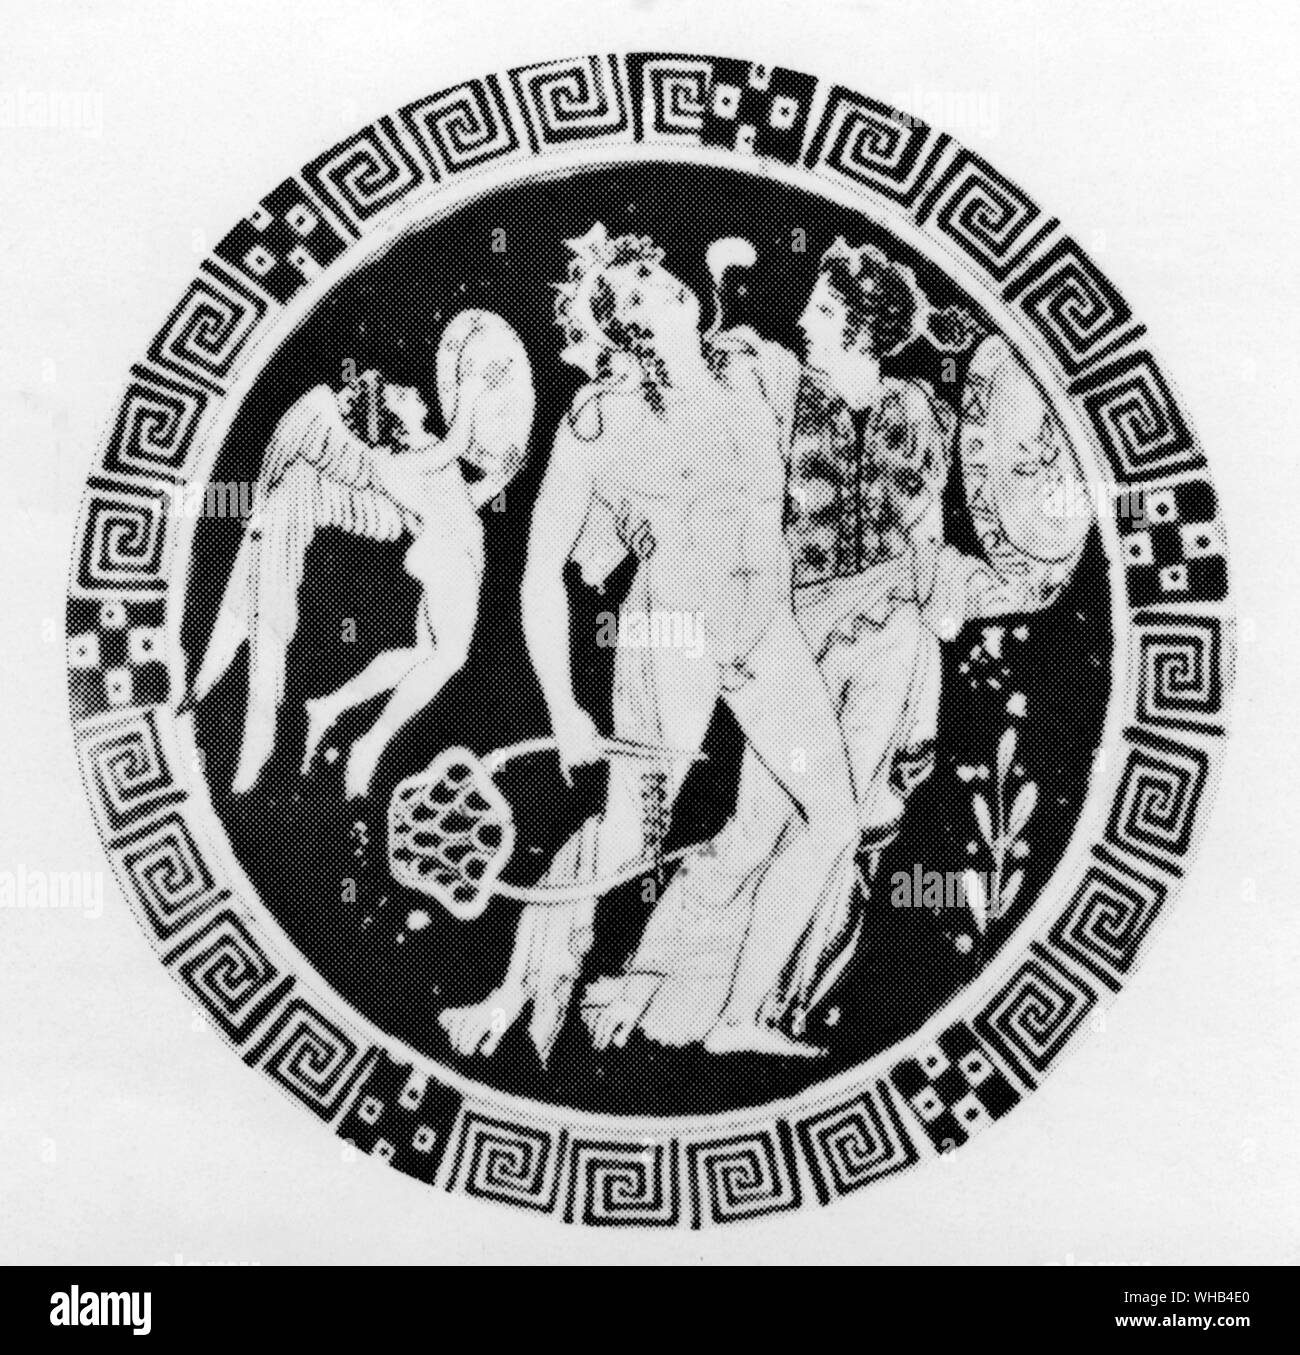 Dionysus & Ariadne escorted by Eros, on an Attic cup 400-390BC -. Dionysus or Dionysos associated with Roman Liber, the Greek god of wine, represents not only the intoxicating power of wine, but also its social and beneficial influences. He was also known as Bacchus. He is viewed as the promoter of civilization, a lawgiver, and lover of skeptic as well as the patron deity of agriculture and the theatre. He was also known as the Liberator -. Ariadne, later became the consort of the god Dionysus -. Eros is depicted as an angel who wears a white robe, carries a bow with heart shaped arrows and a Stock Photo